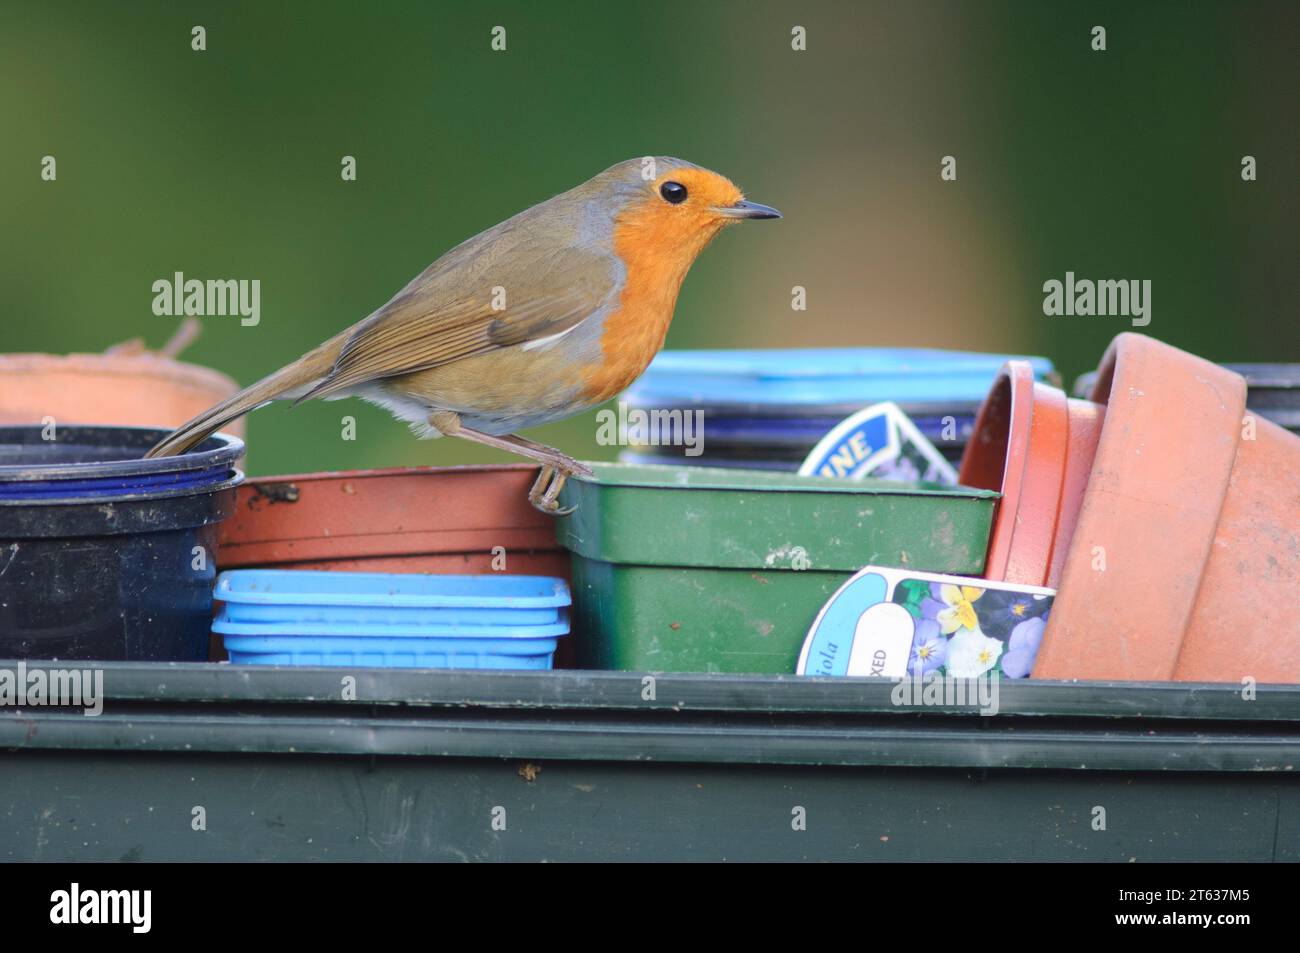 European robin Erithacus rubecula, perched on tray of plant pots in garden, County Durham, England, UK, November. Stock Photo